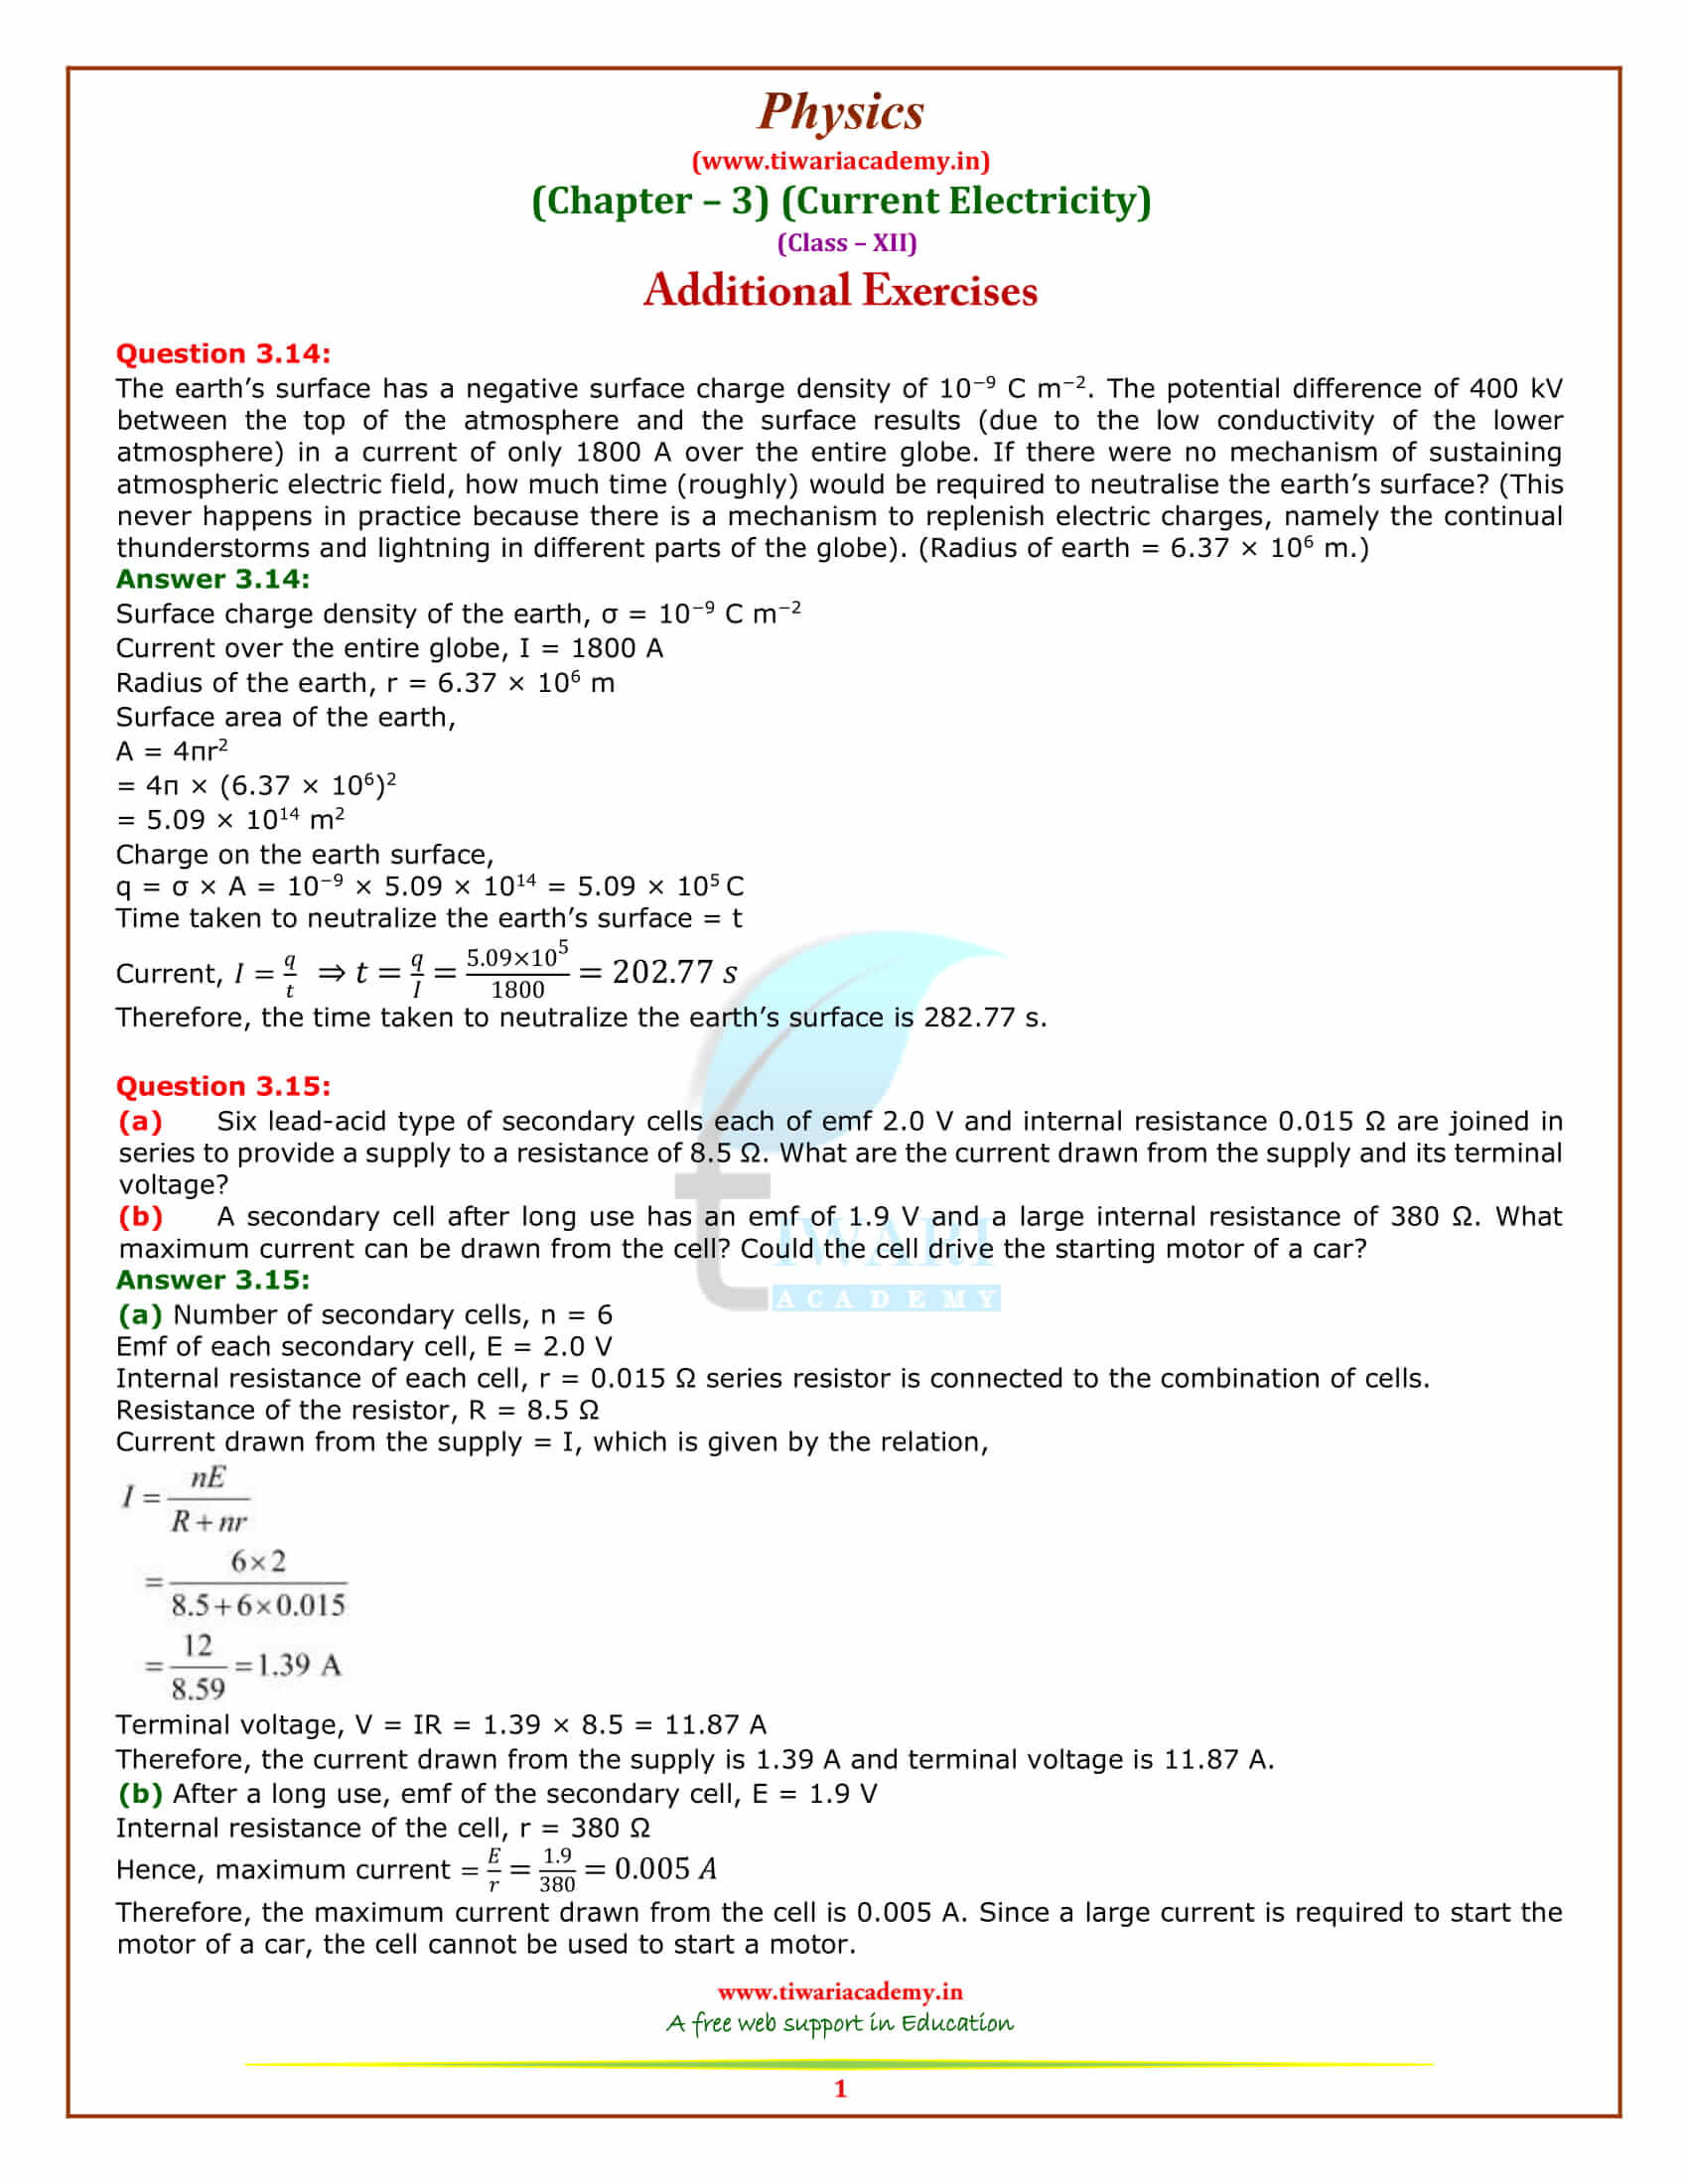 NCERT Solutions for Class 12 Physics Chapter 3 Current Electricity additional exercises